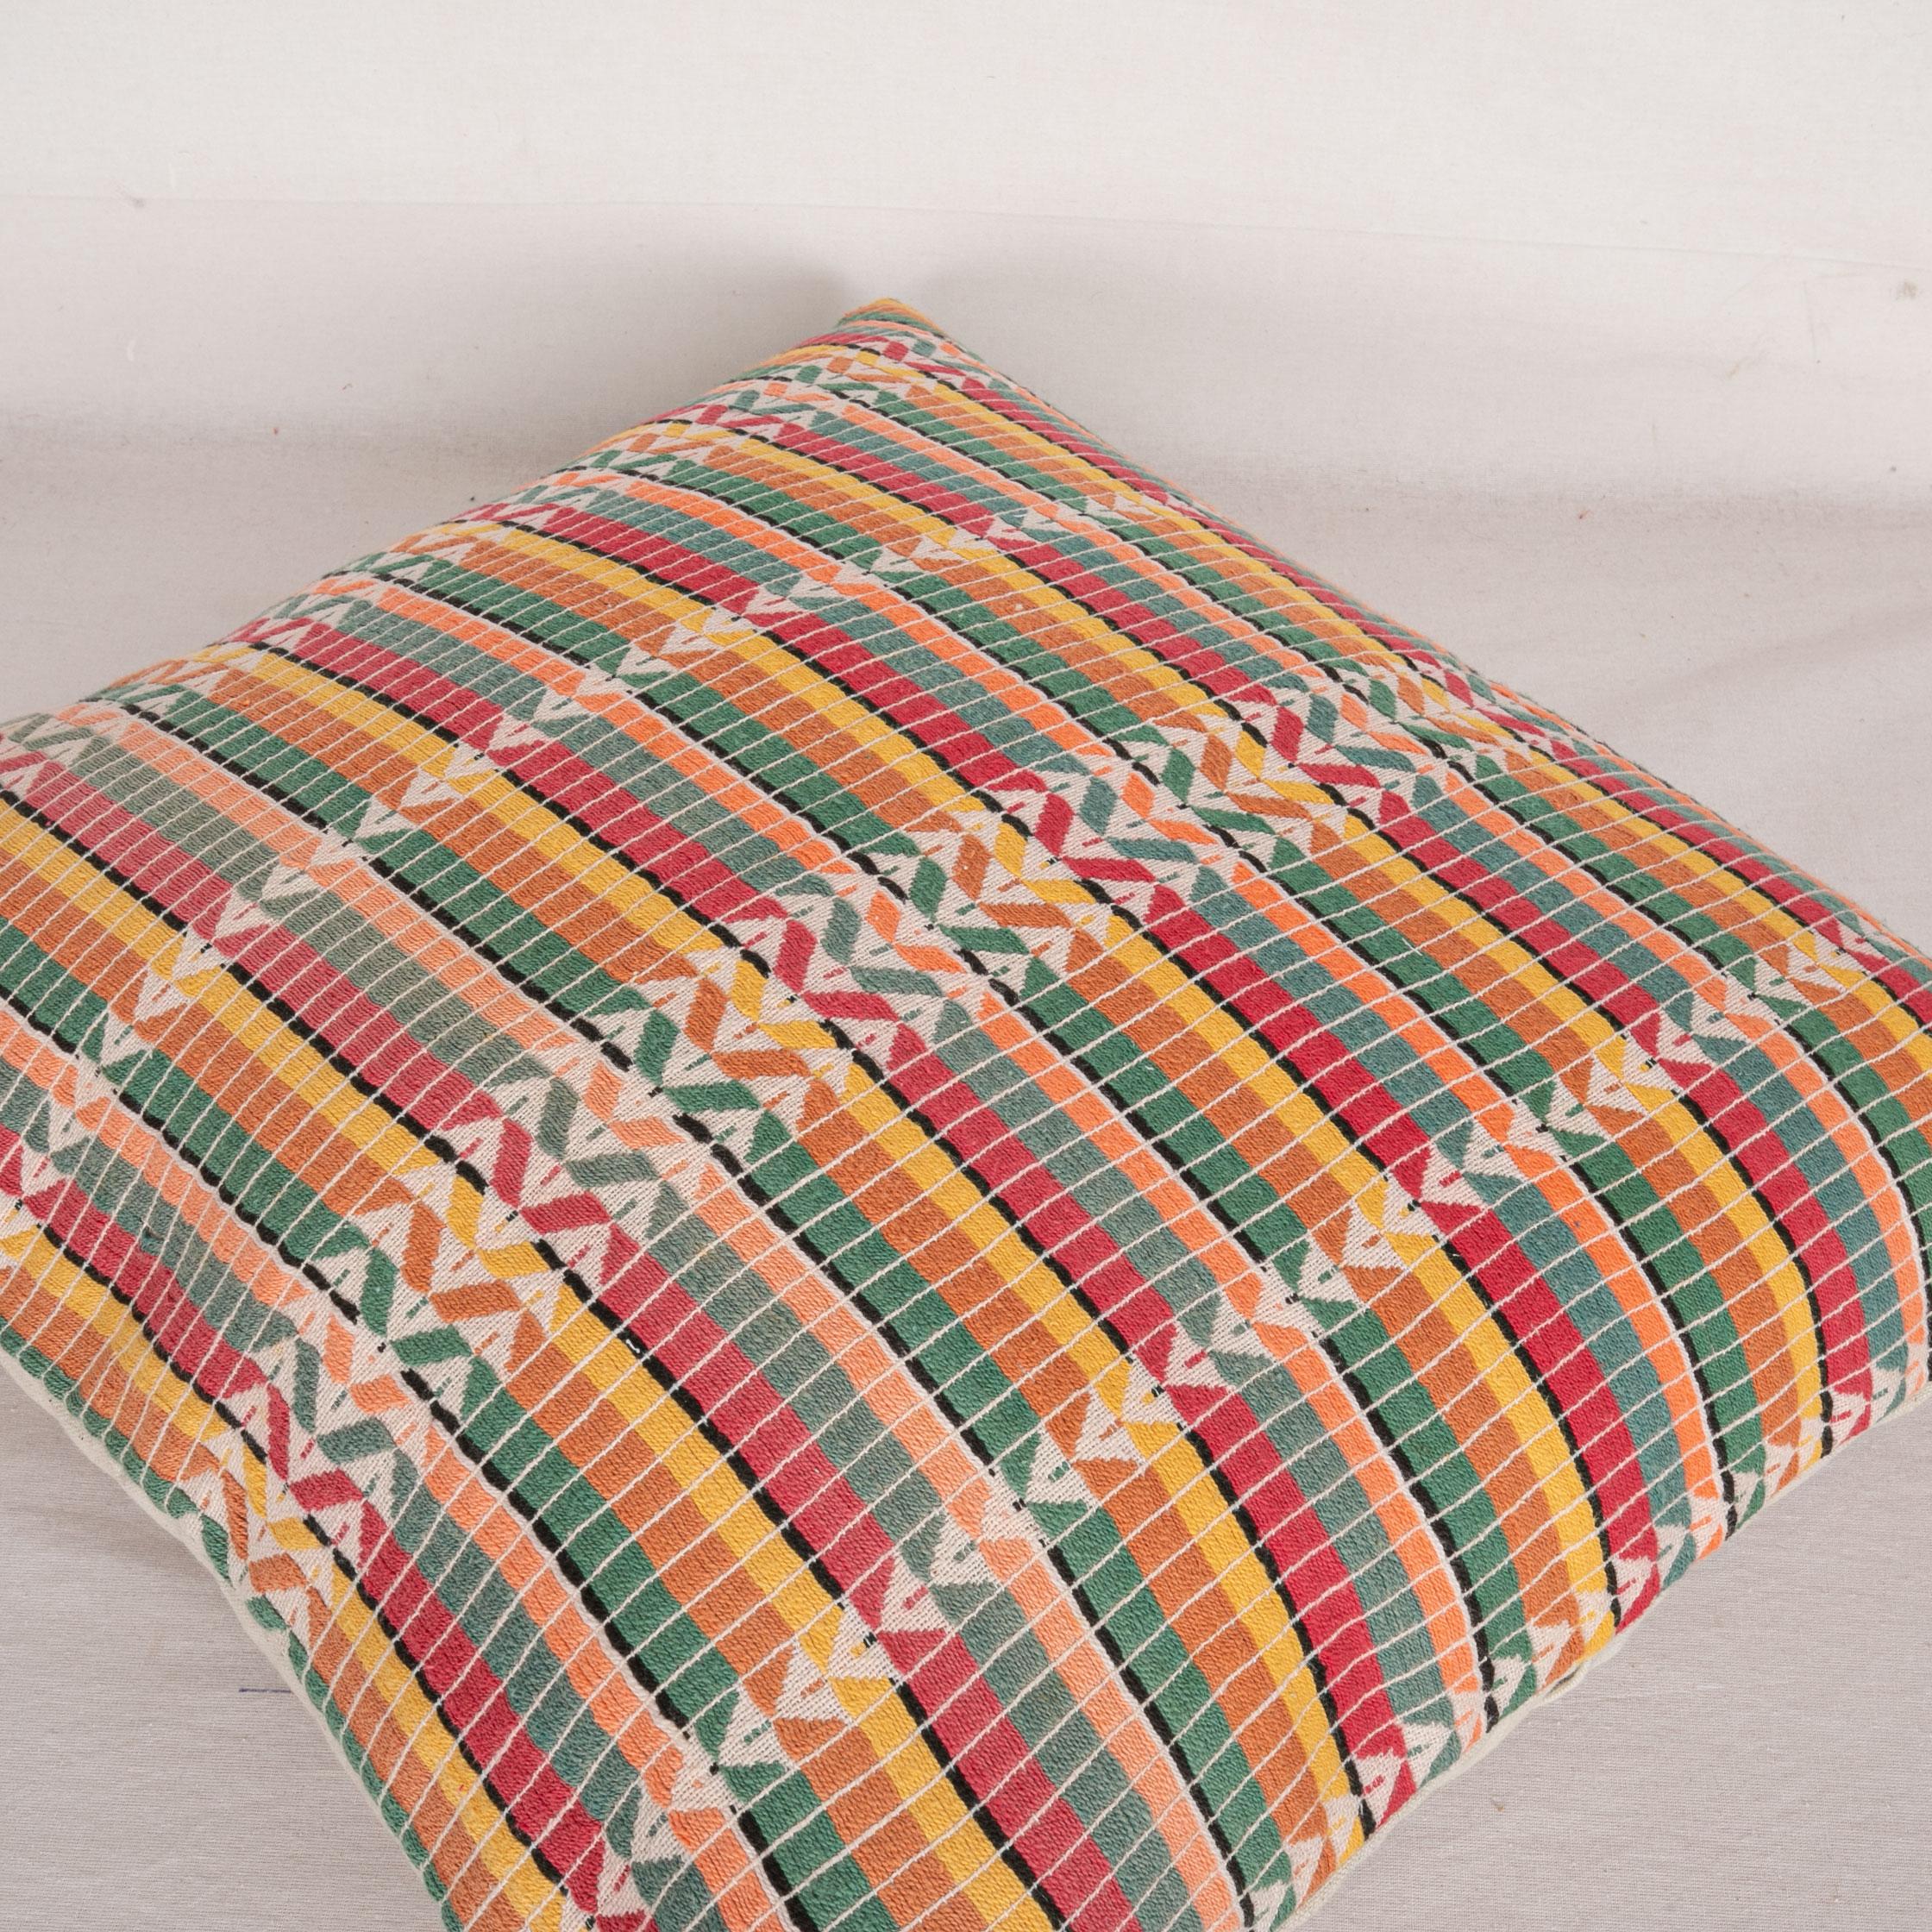 Pillow Cases Fashioned from a Mid-20th Century Afghan Hazara Embroidery For Sale 2